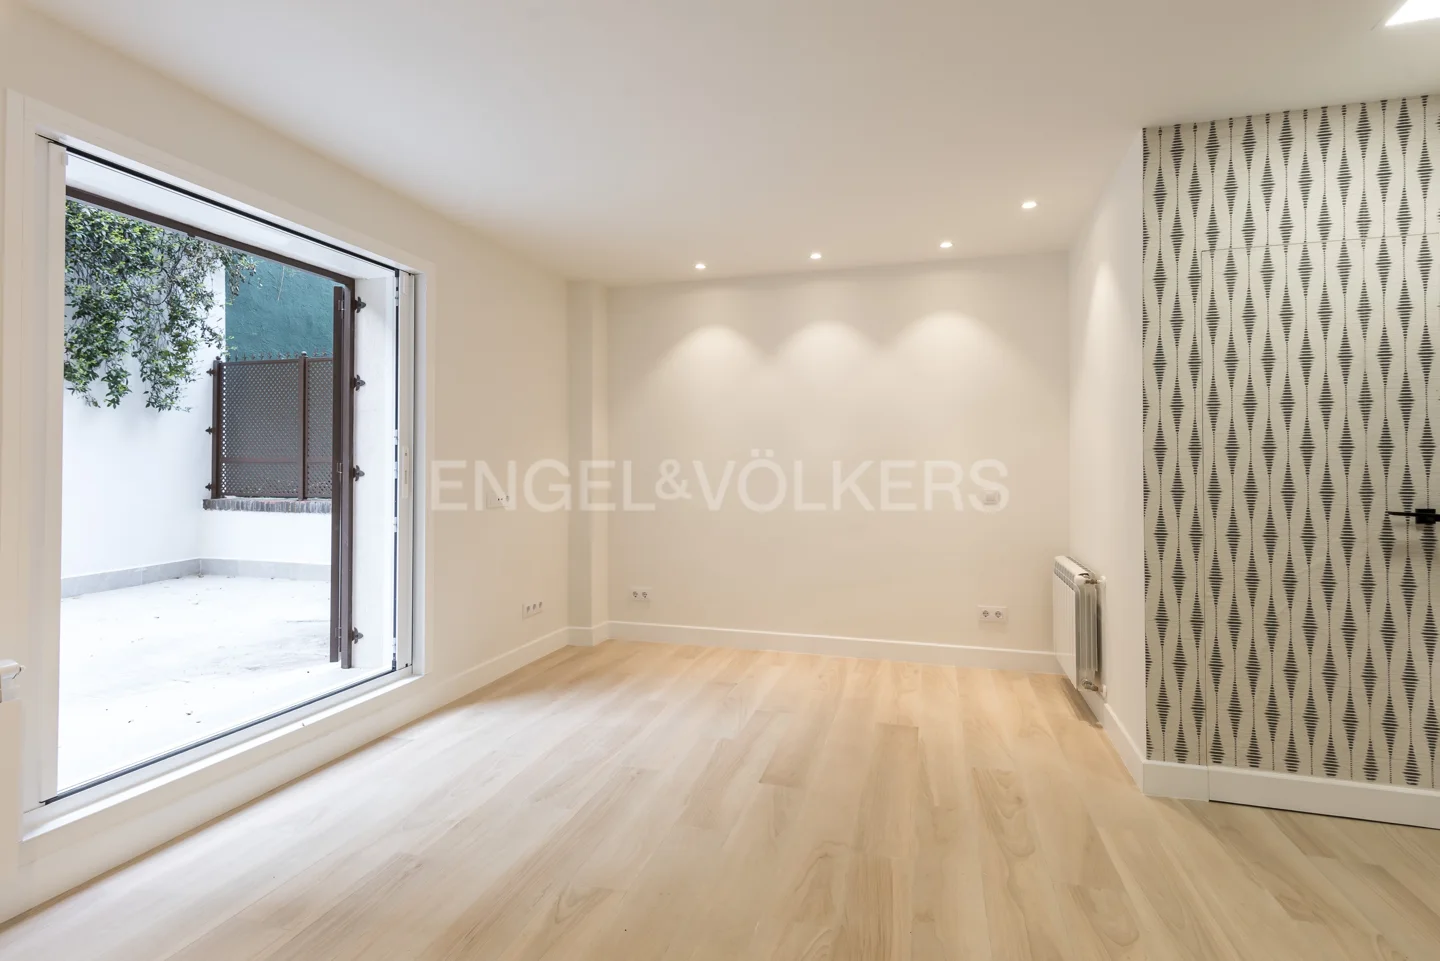 Brand new two-bedroom apartment with terrace and swimming pool in El Viso